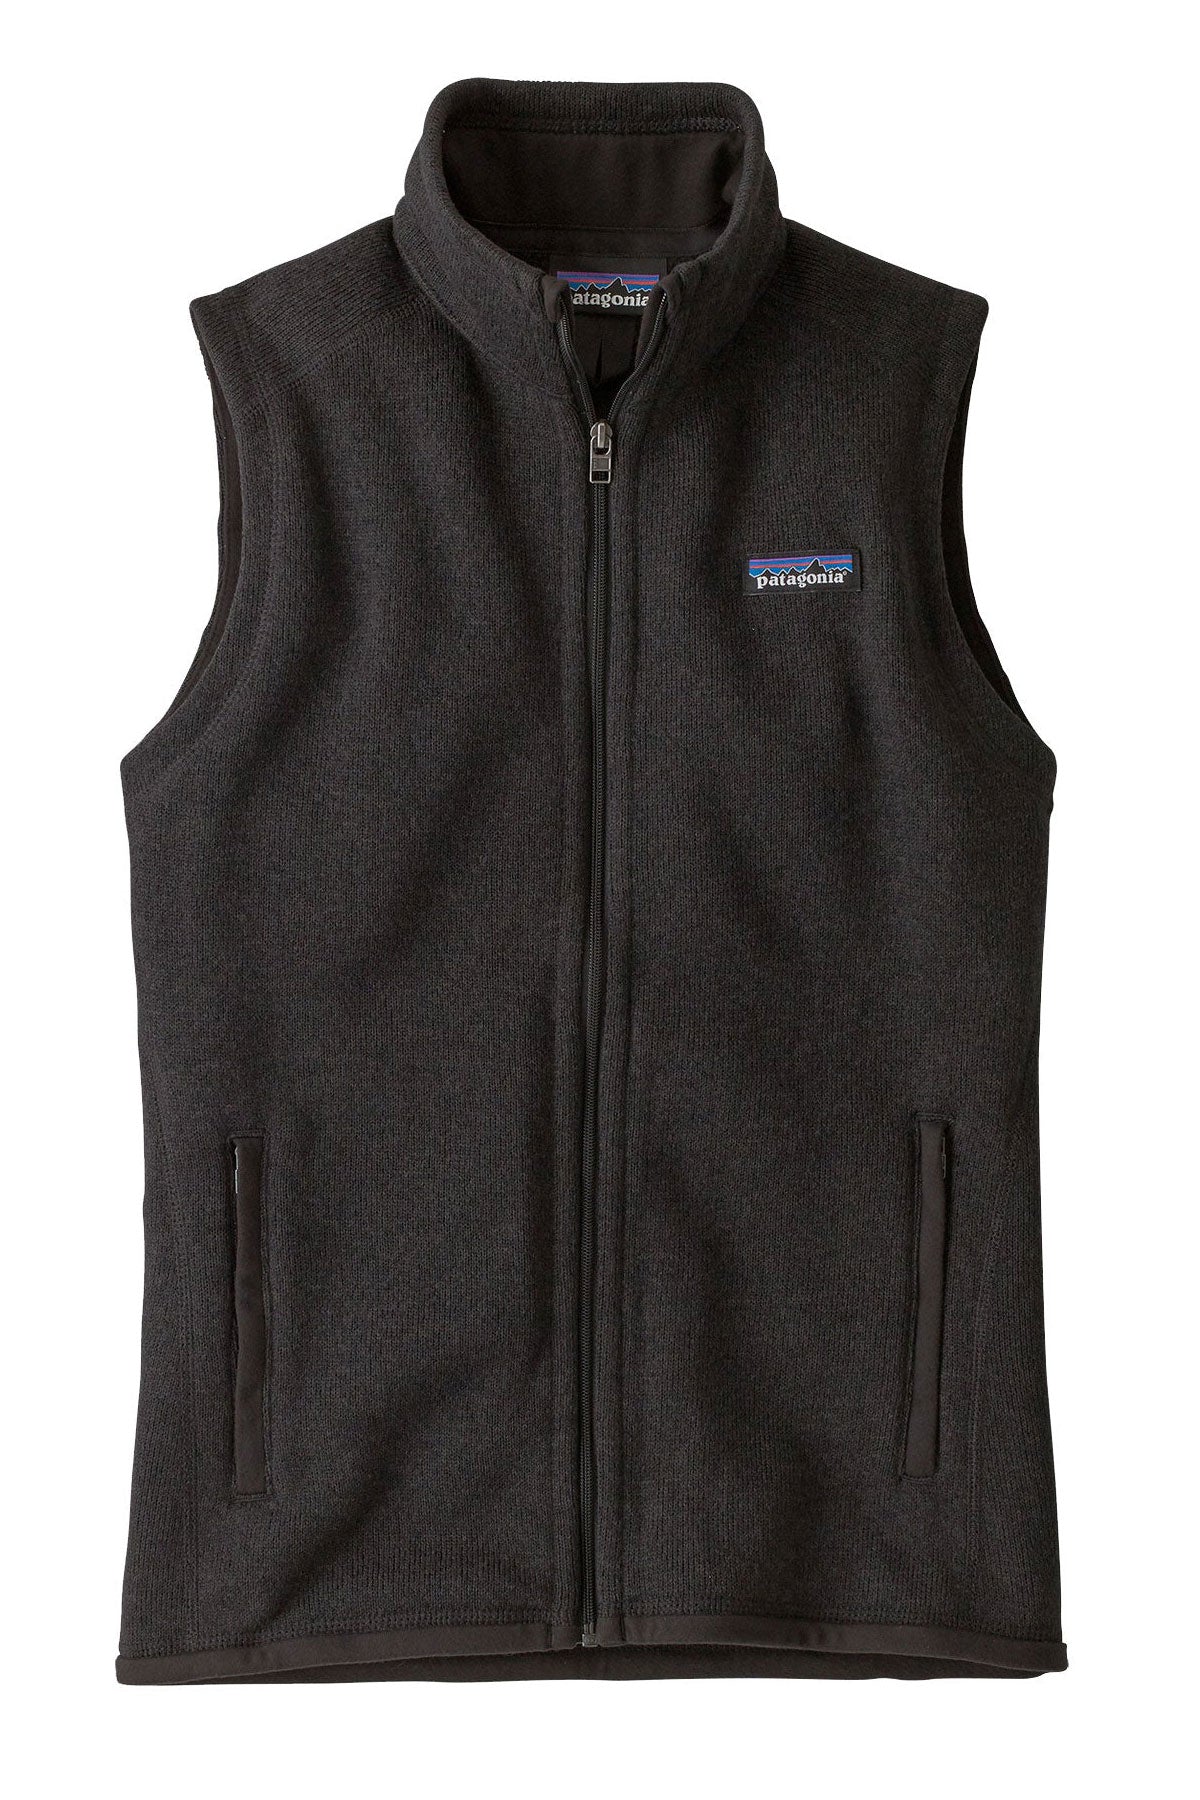 Patagonia Womens Better Sweater Fleece Customized Vests, Black